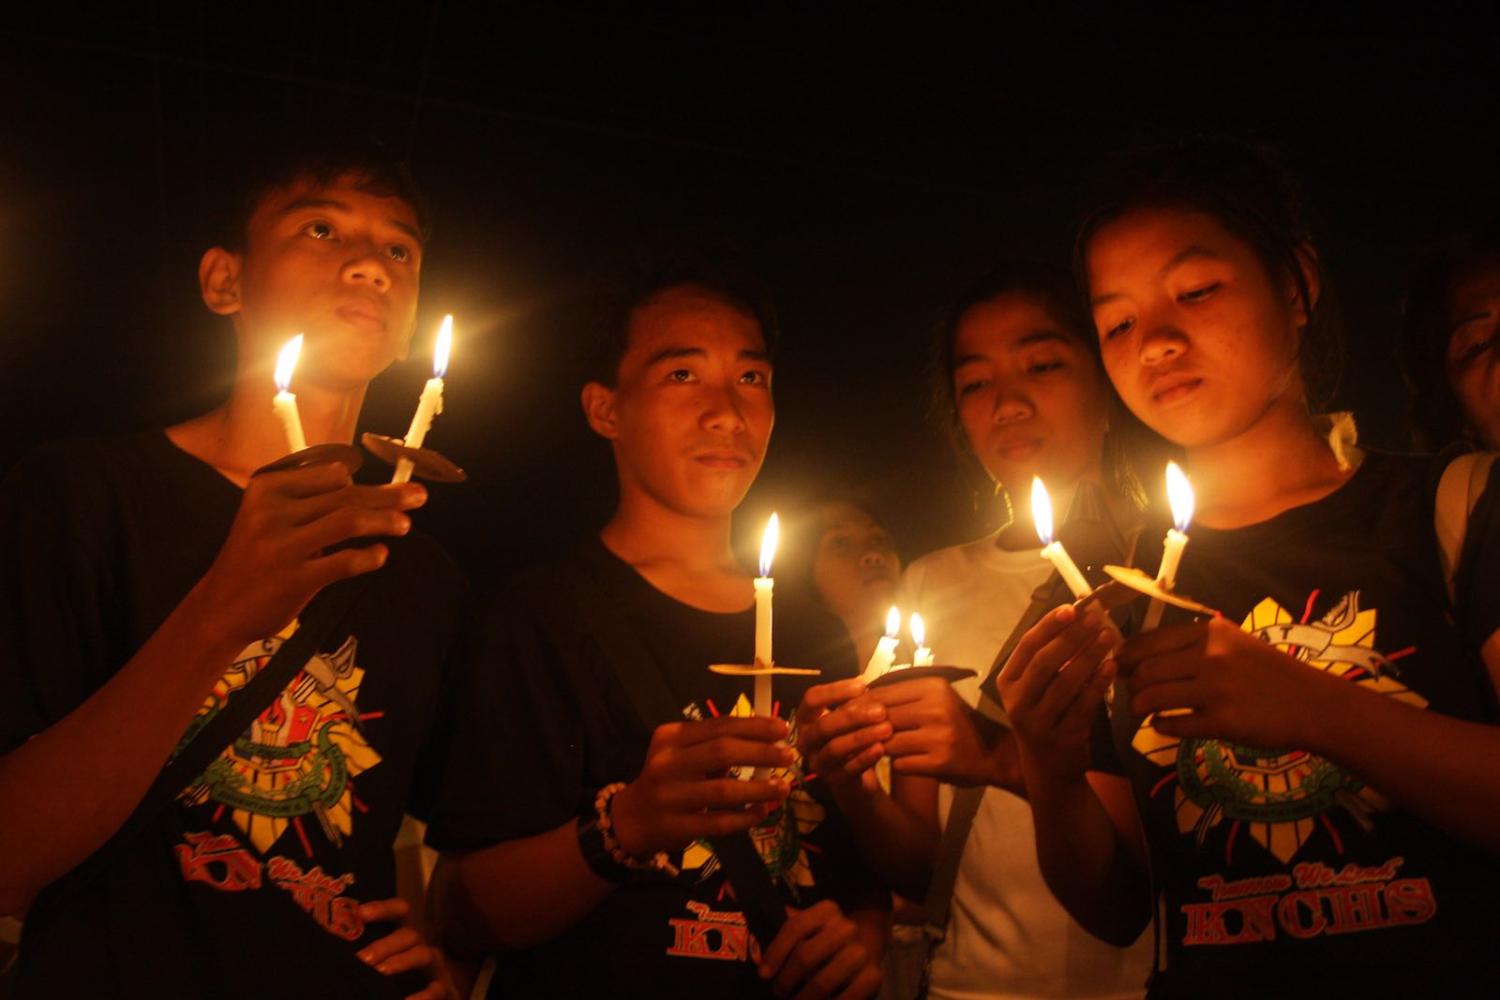 A vigil for victims held the day after the Maguindanao massacre, November 2009 (Photo: Jeoffrey Maitem/Getty Images)